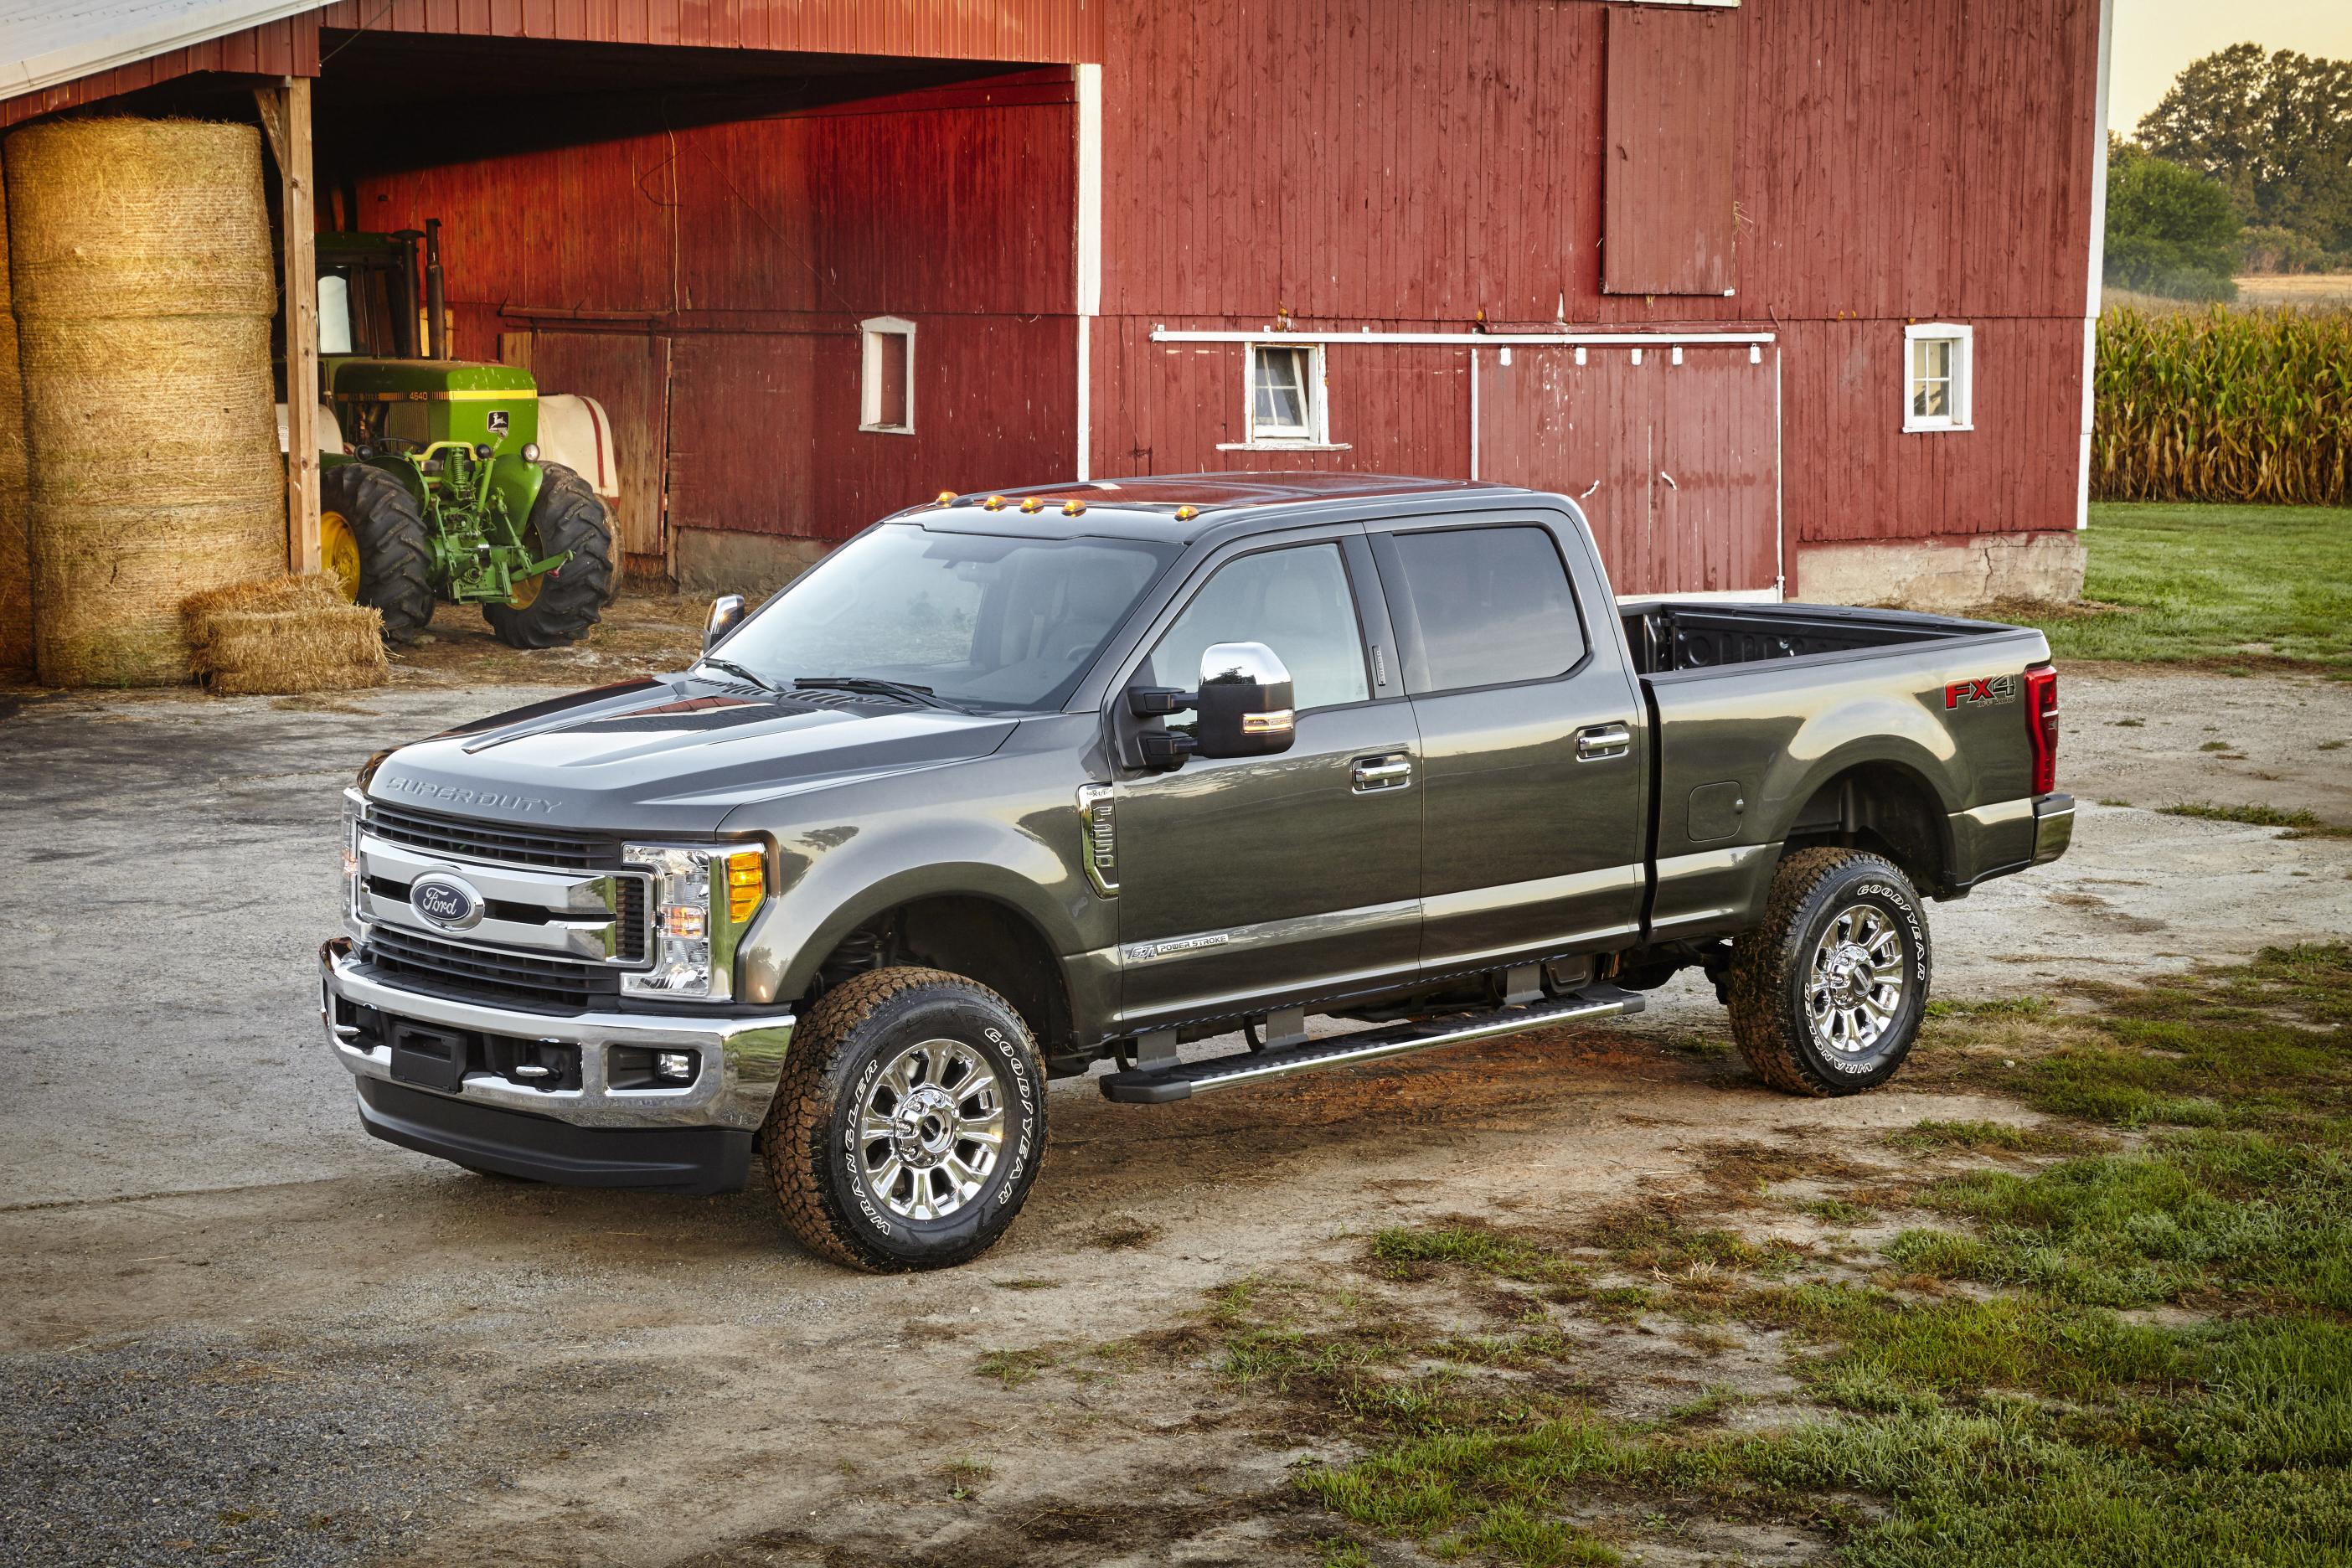 2017 Ford F Series Super Duty Tested In Michigan Its Built Tough